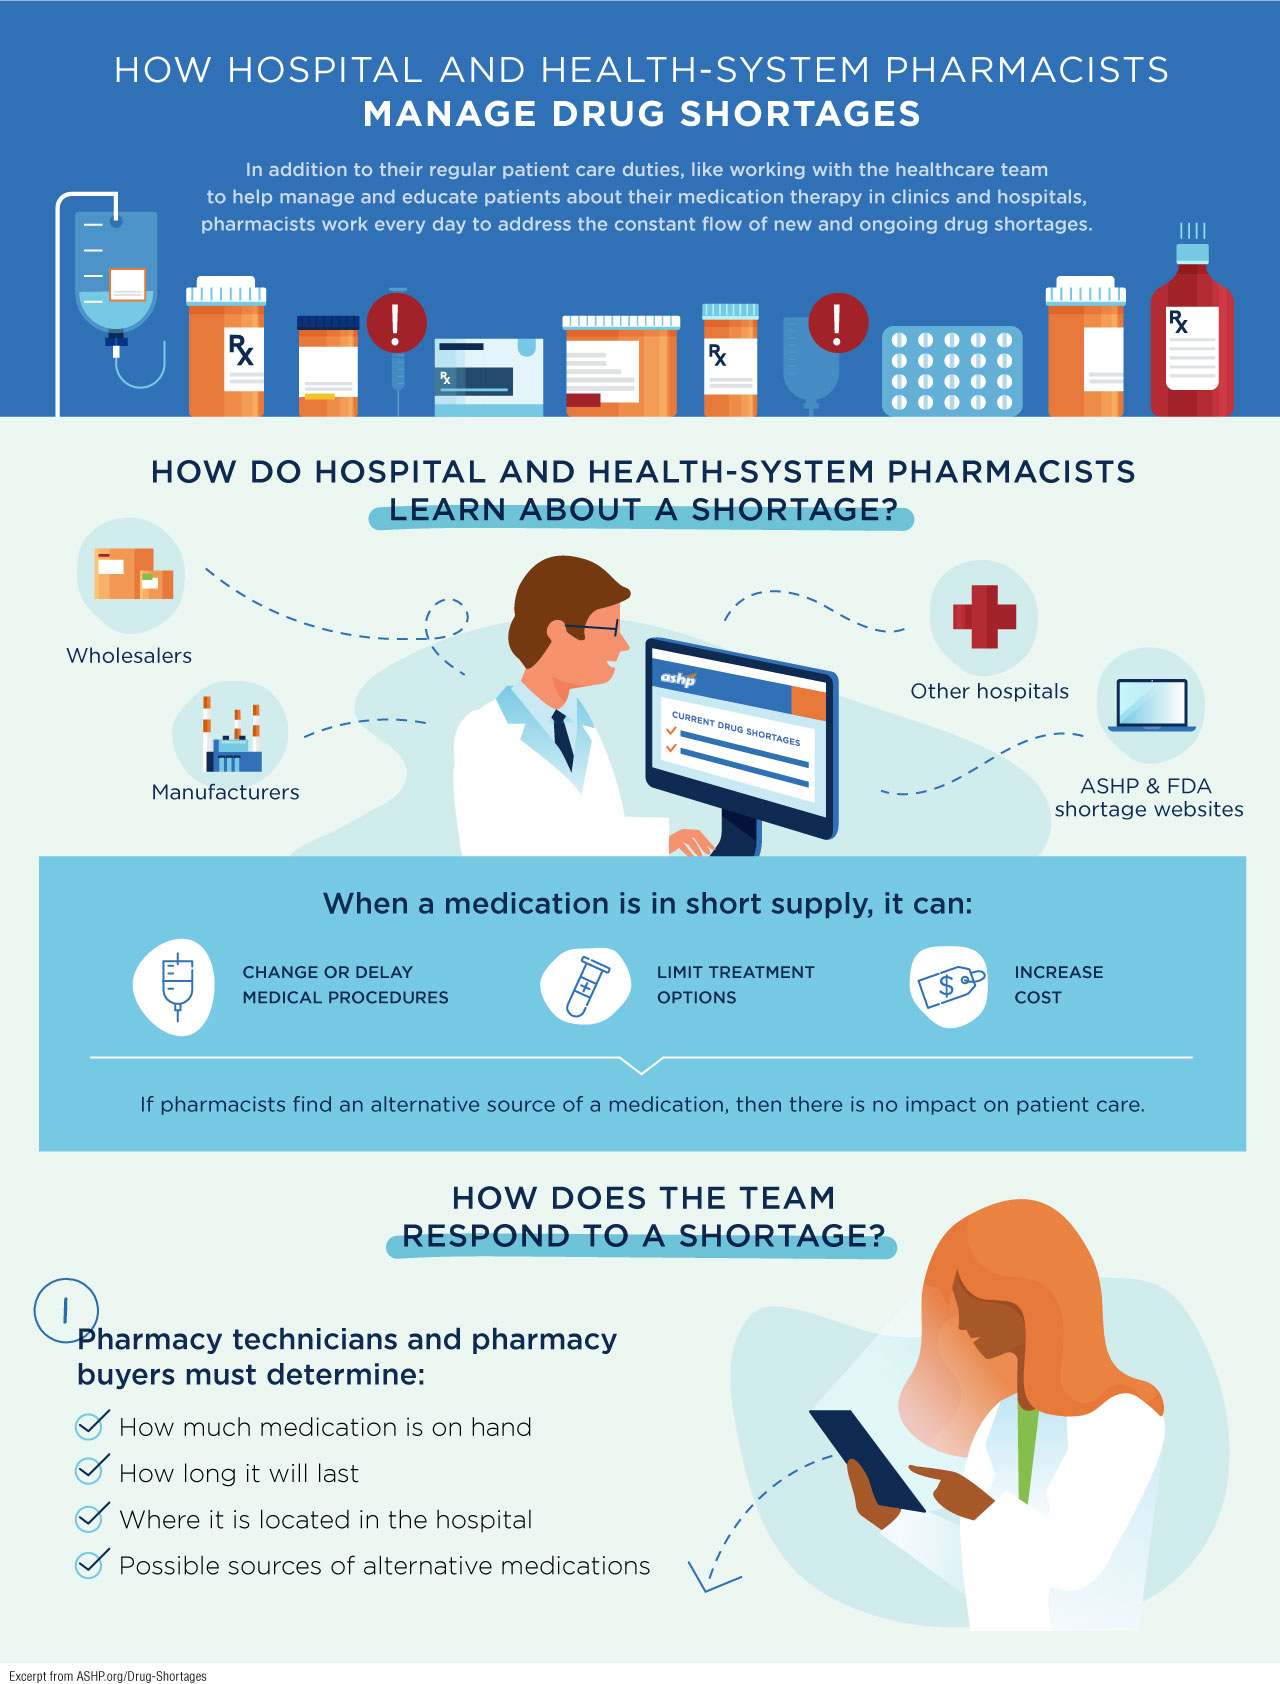 An excerpt of a PDF illustrating how hospitals and health systems handle drug shortages